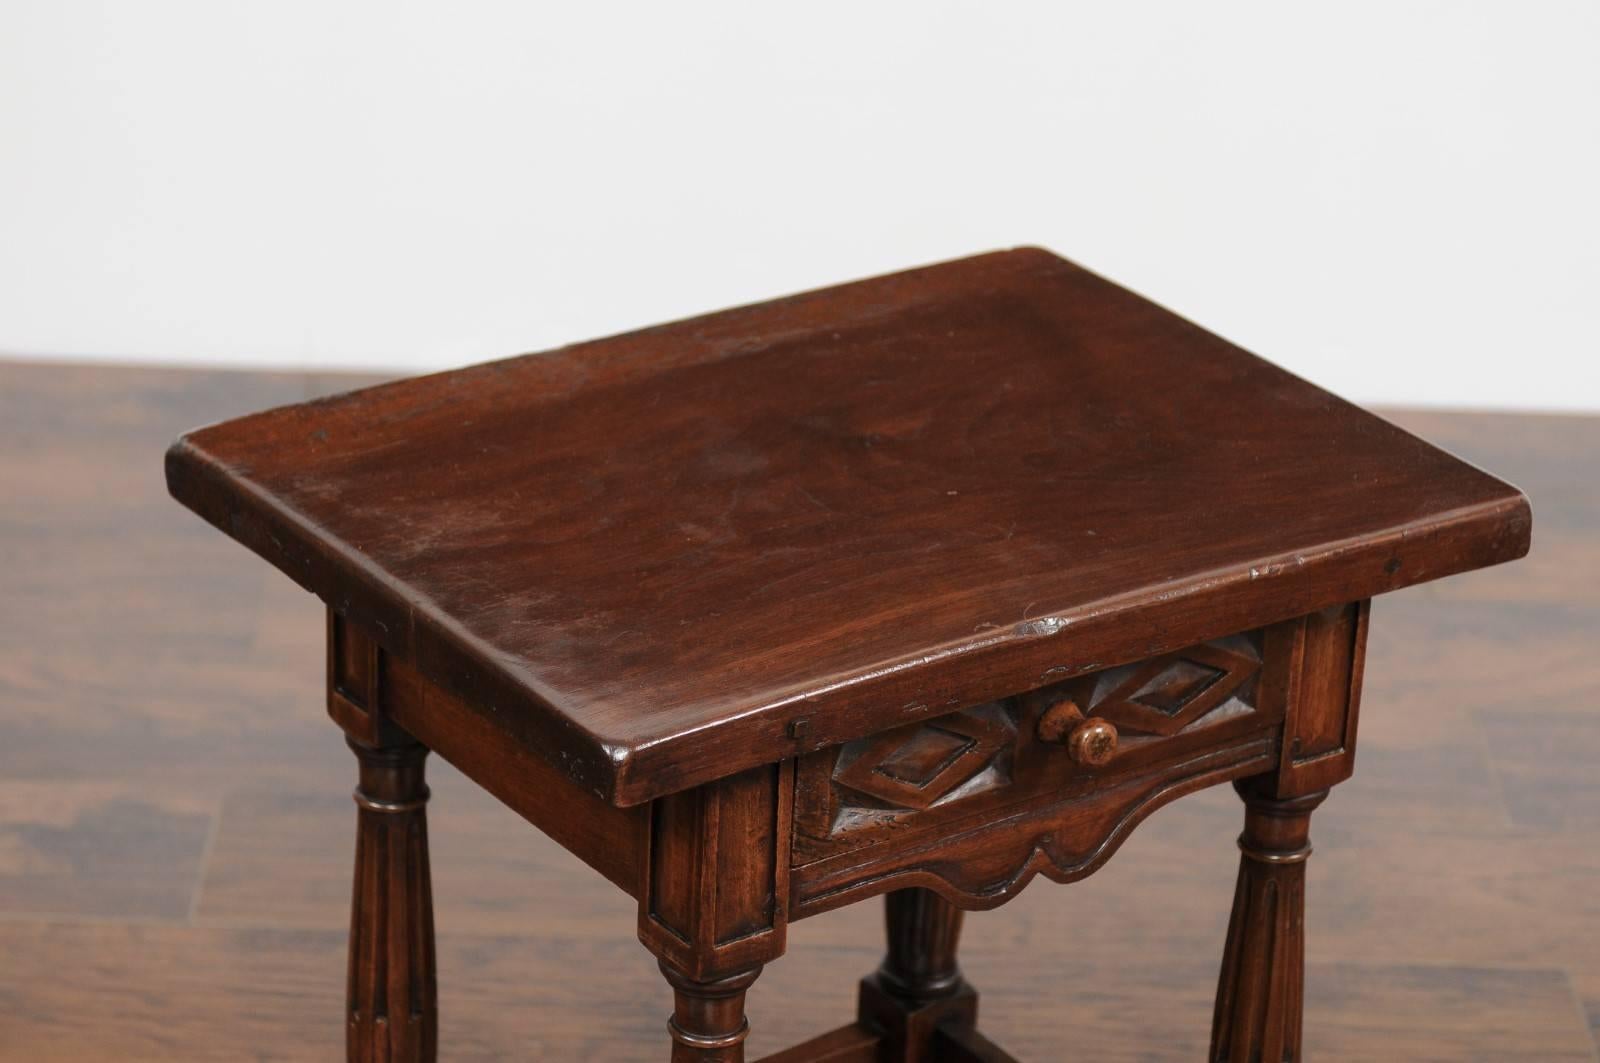 Carved Petite Italian Walnut Side Table with Single Drawer and Fluted Legs, circa 1870 For Sale